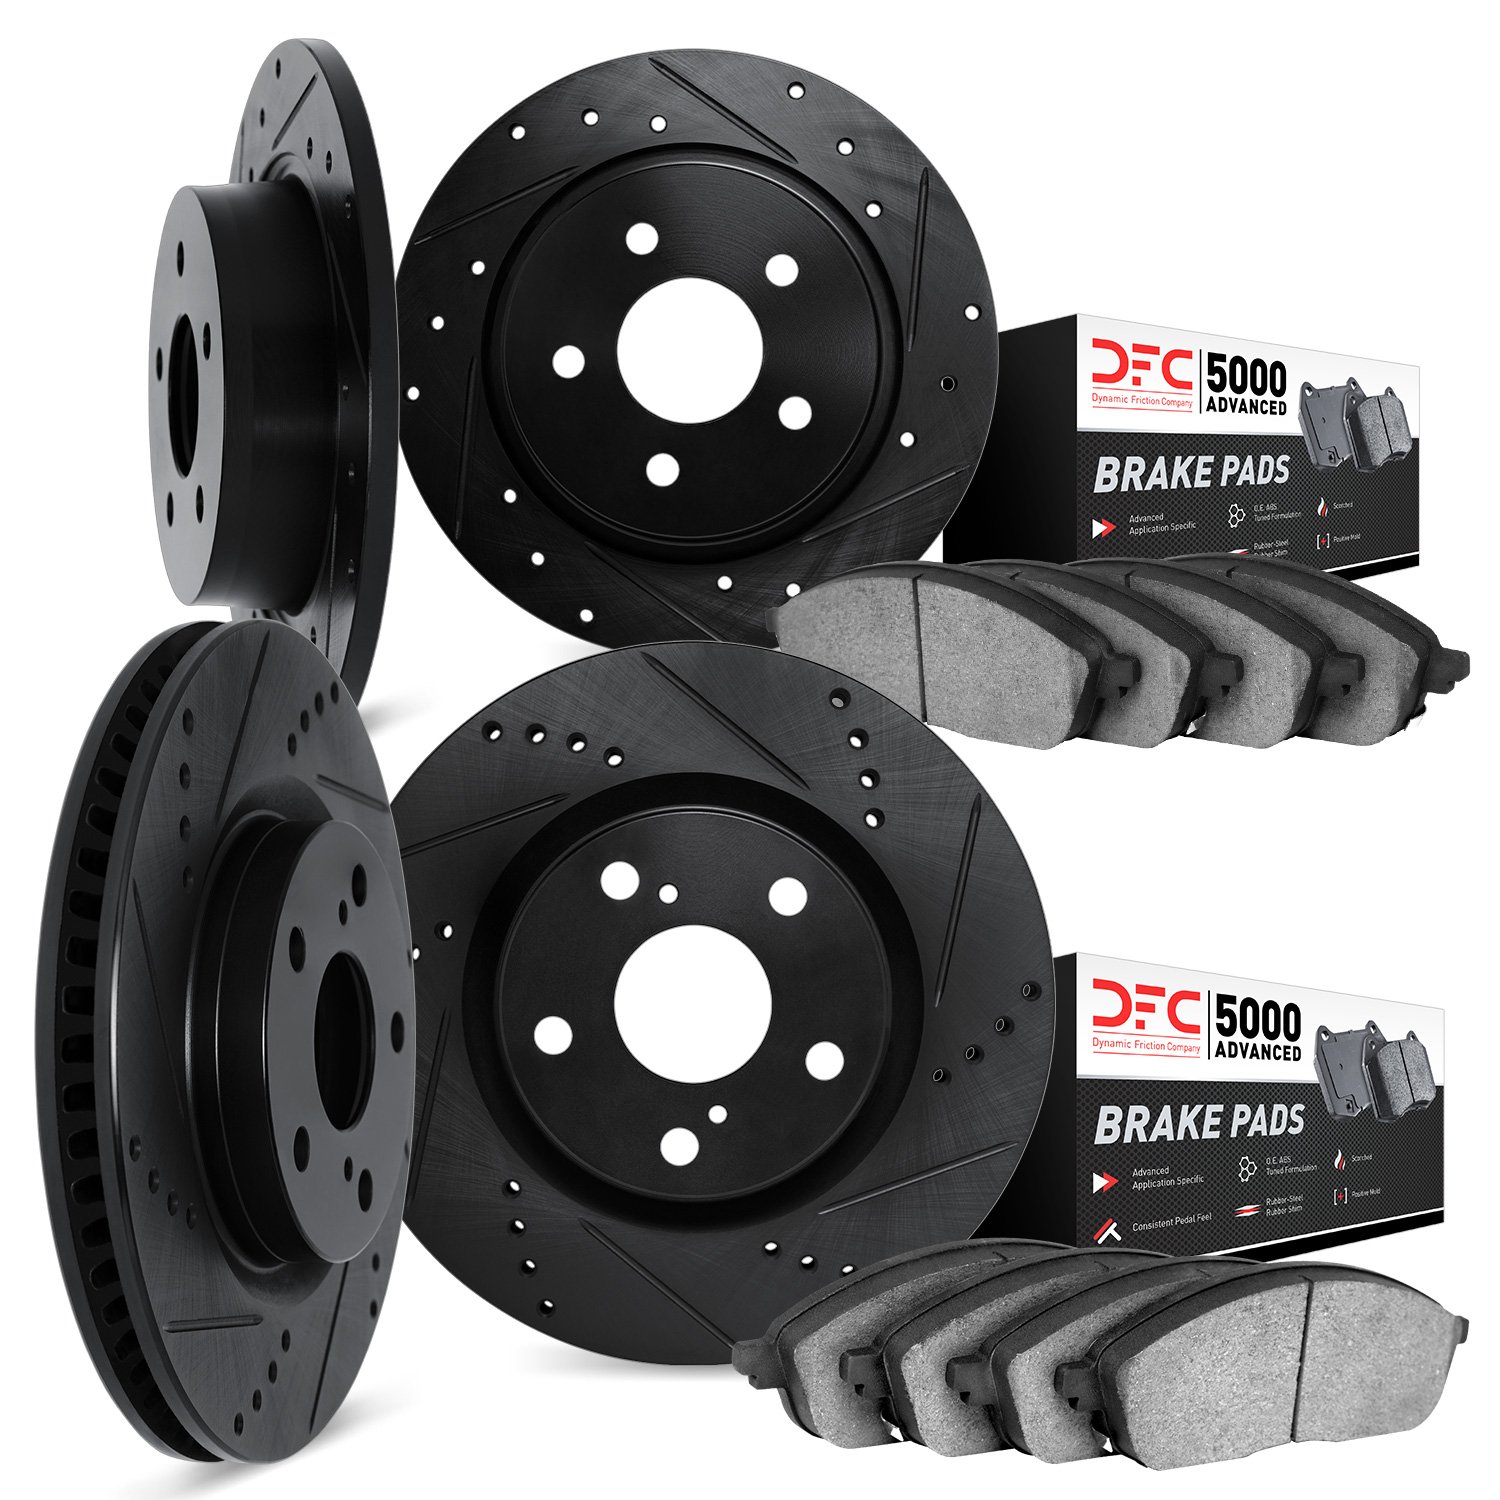 8504-63003 Drilled/Slotted Brake Rotors w/5000 Advanced Brake Pads Kit [Black], 2003-2009 Mercedes-Benz, Position: Front and Rea